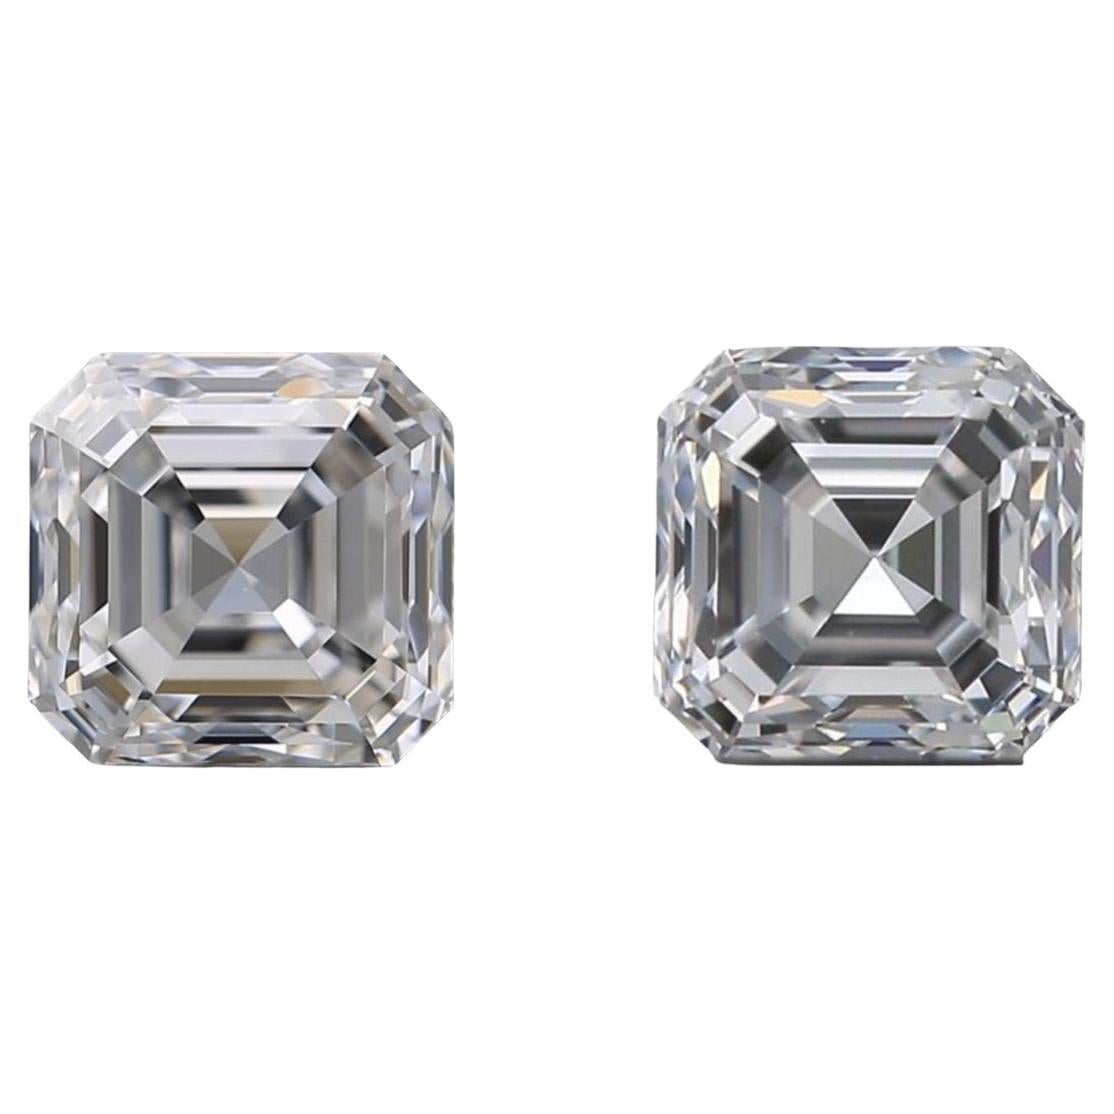 Natural Pair of Asher Diamond in a 1.85 Carat Total Weight with D VVS1, GIA Cert